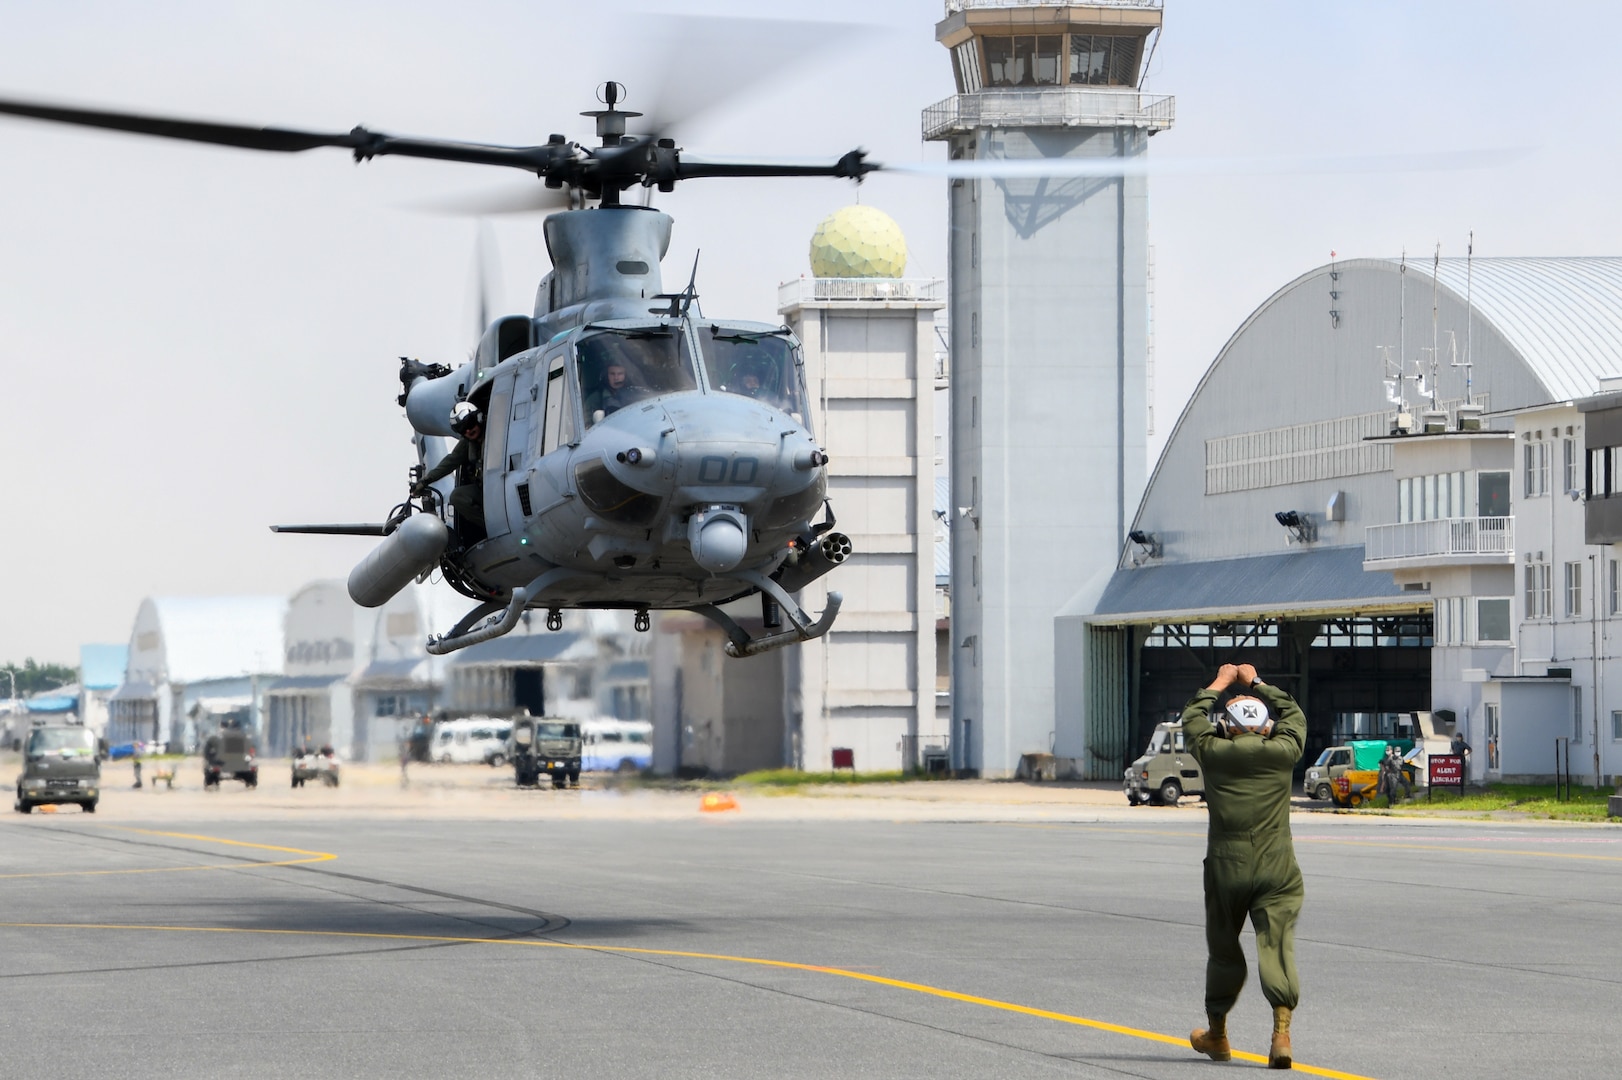 MISAWA, Japan (July 15, 2021) – Staff Sgt. Gustavo Lopez, a Plane Captain assigned to the “Vipers” of Marine Light Attack Helicopter Squadron (HMLA) 169, guides an UH-1Y Venom as it arrives at Naval Air Facility (NAF) Misawa. HMLA-169 is at NAF Misawa to conduct Tilt Rotor/Rotary Wing (TR-RW) training exercises and reduce the training activity impact on Okinawa.